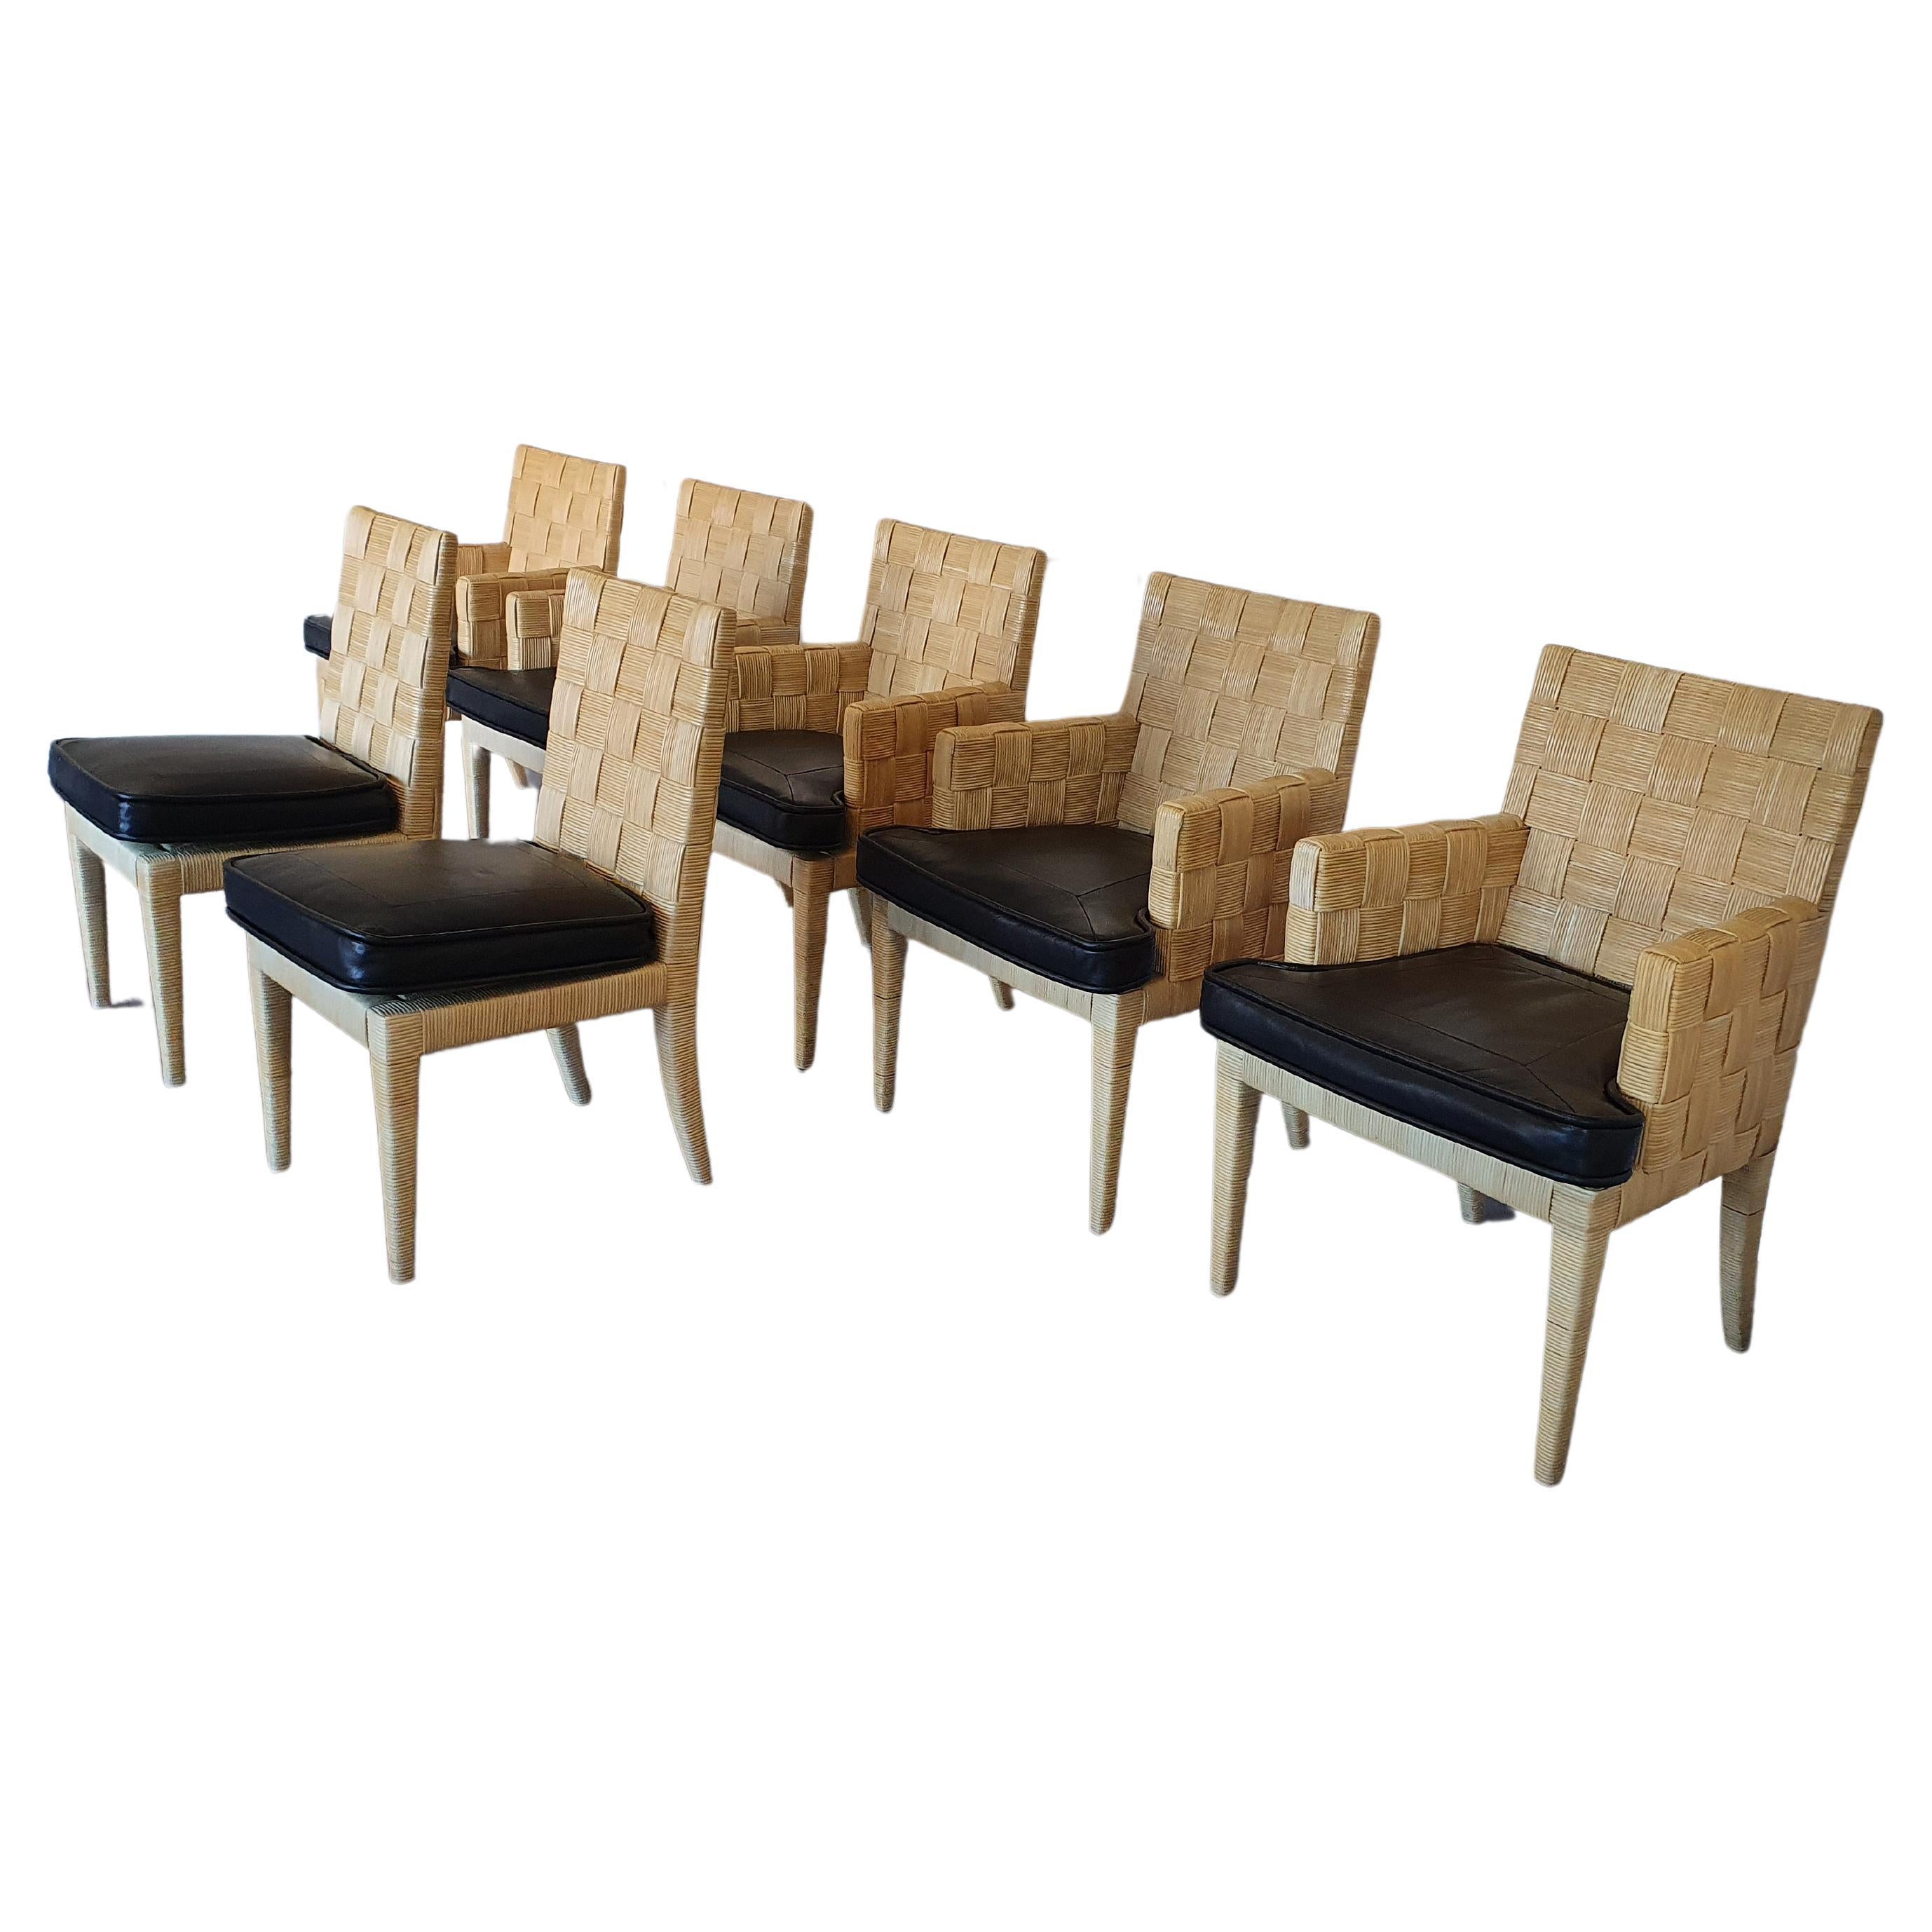 Donghia Block Island chairs 1990s with leather seats. 5 x armrests, 2 x without For Sale